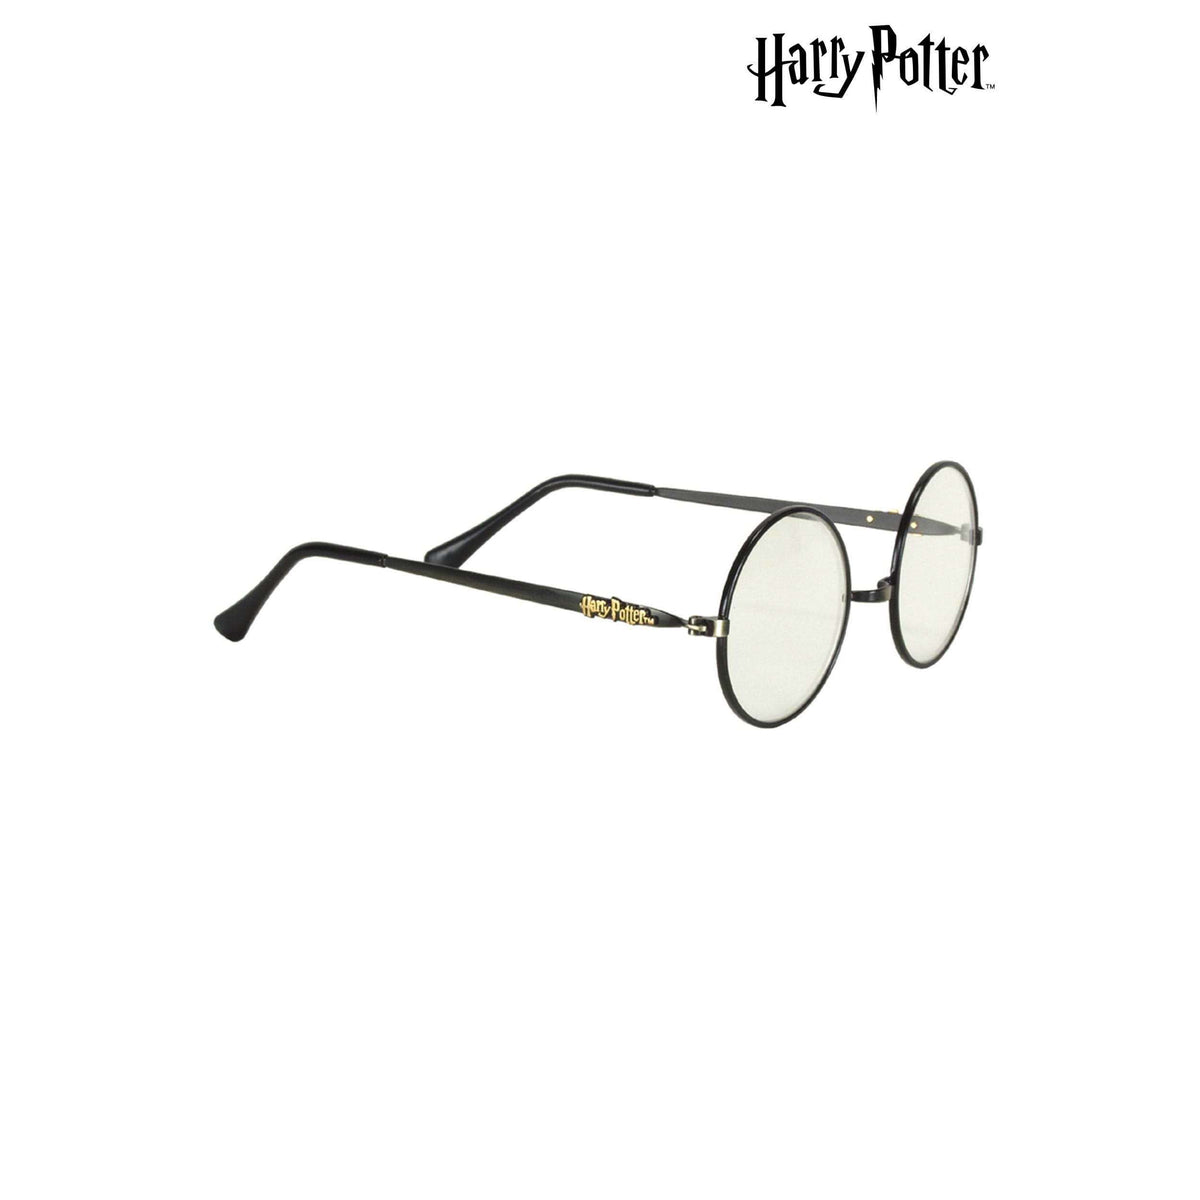 Harry Potter Wired Glasses